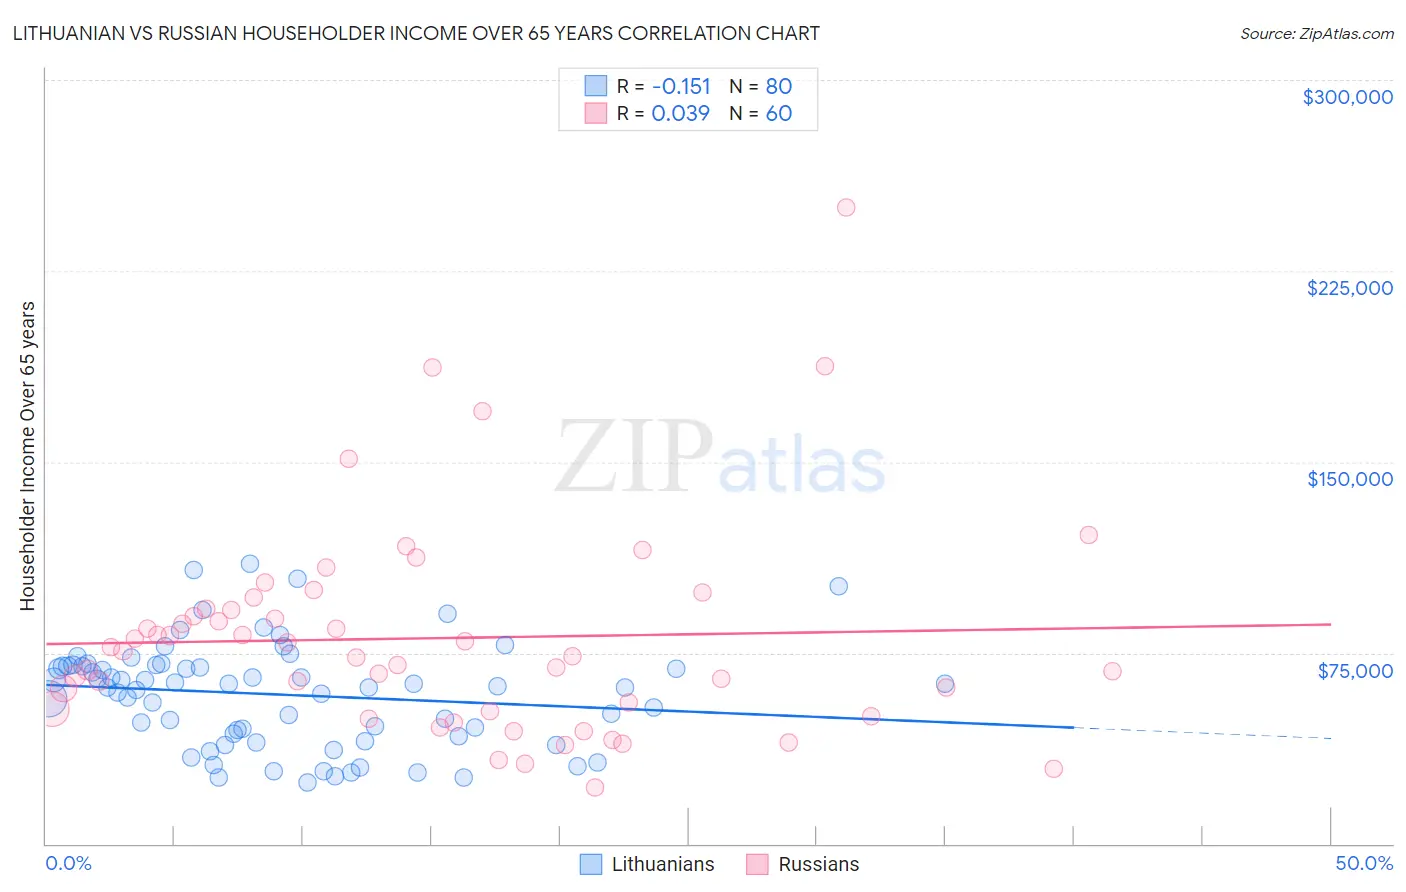 Lithuanian vs Russian Householder Income Over 65 years